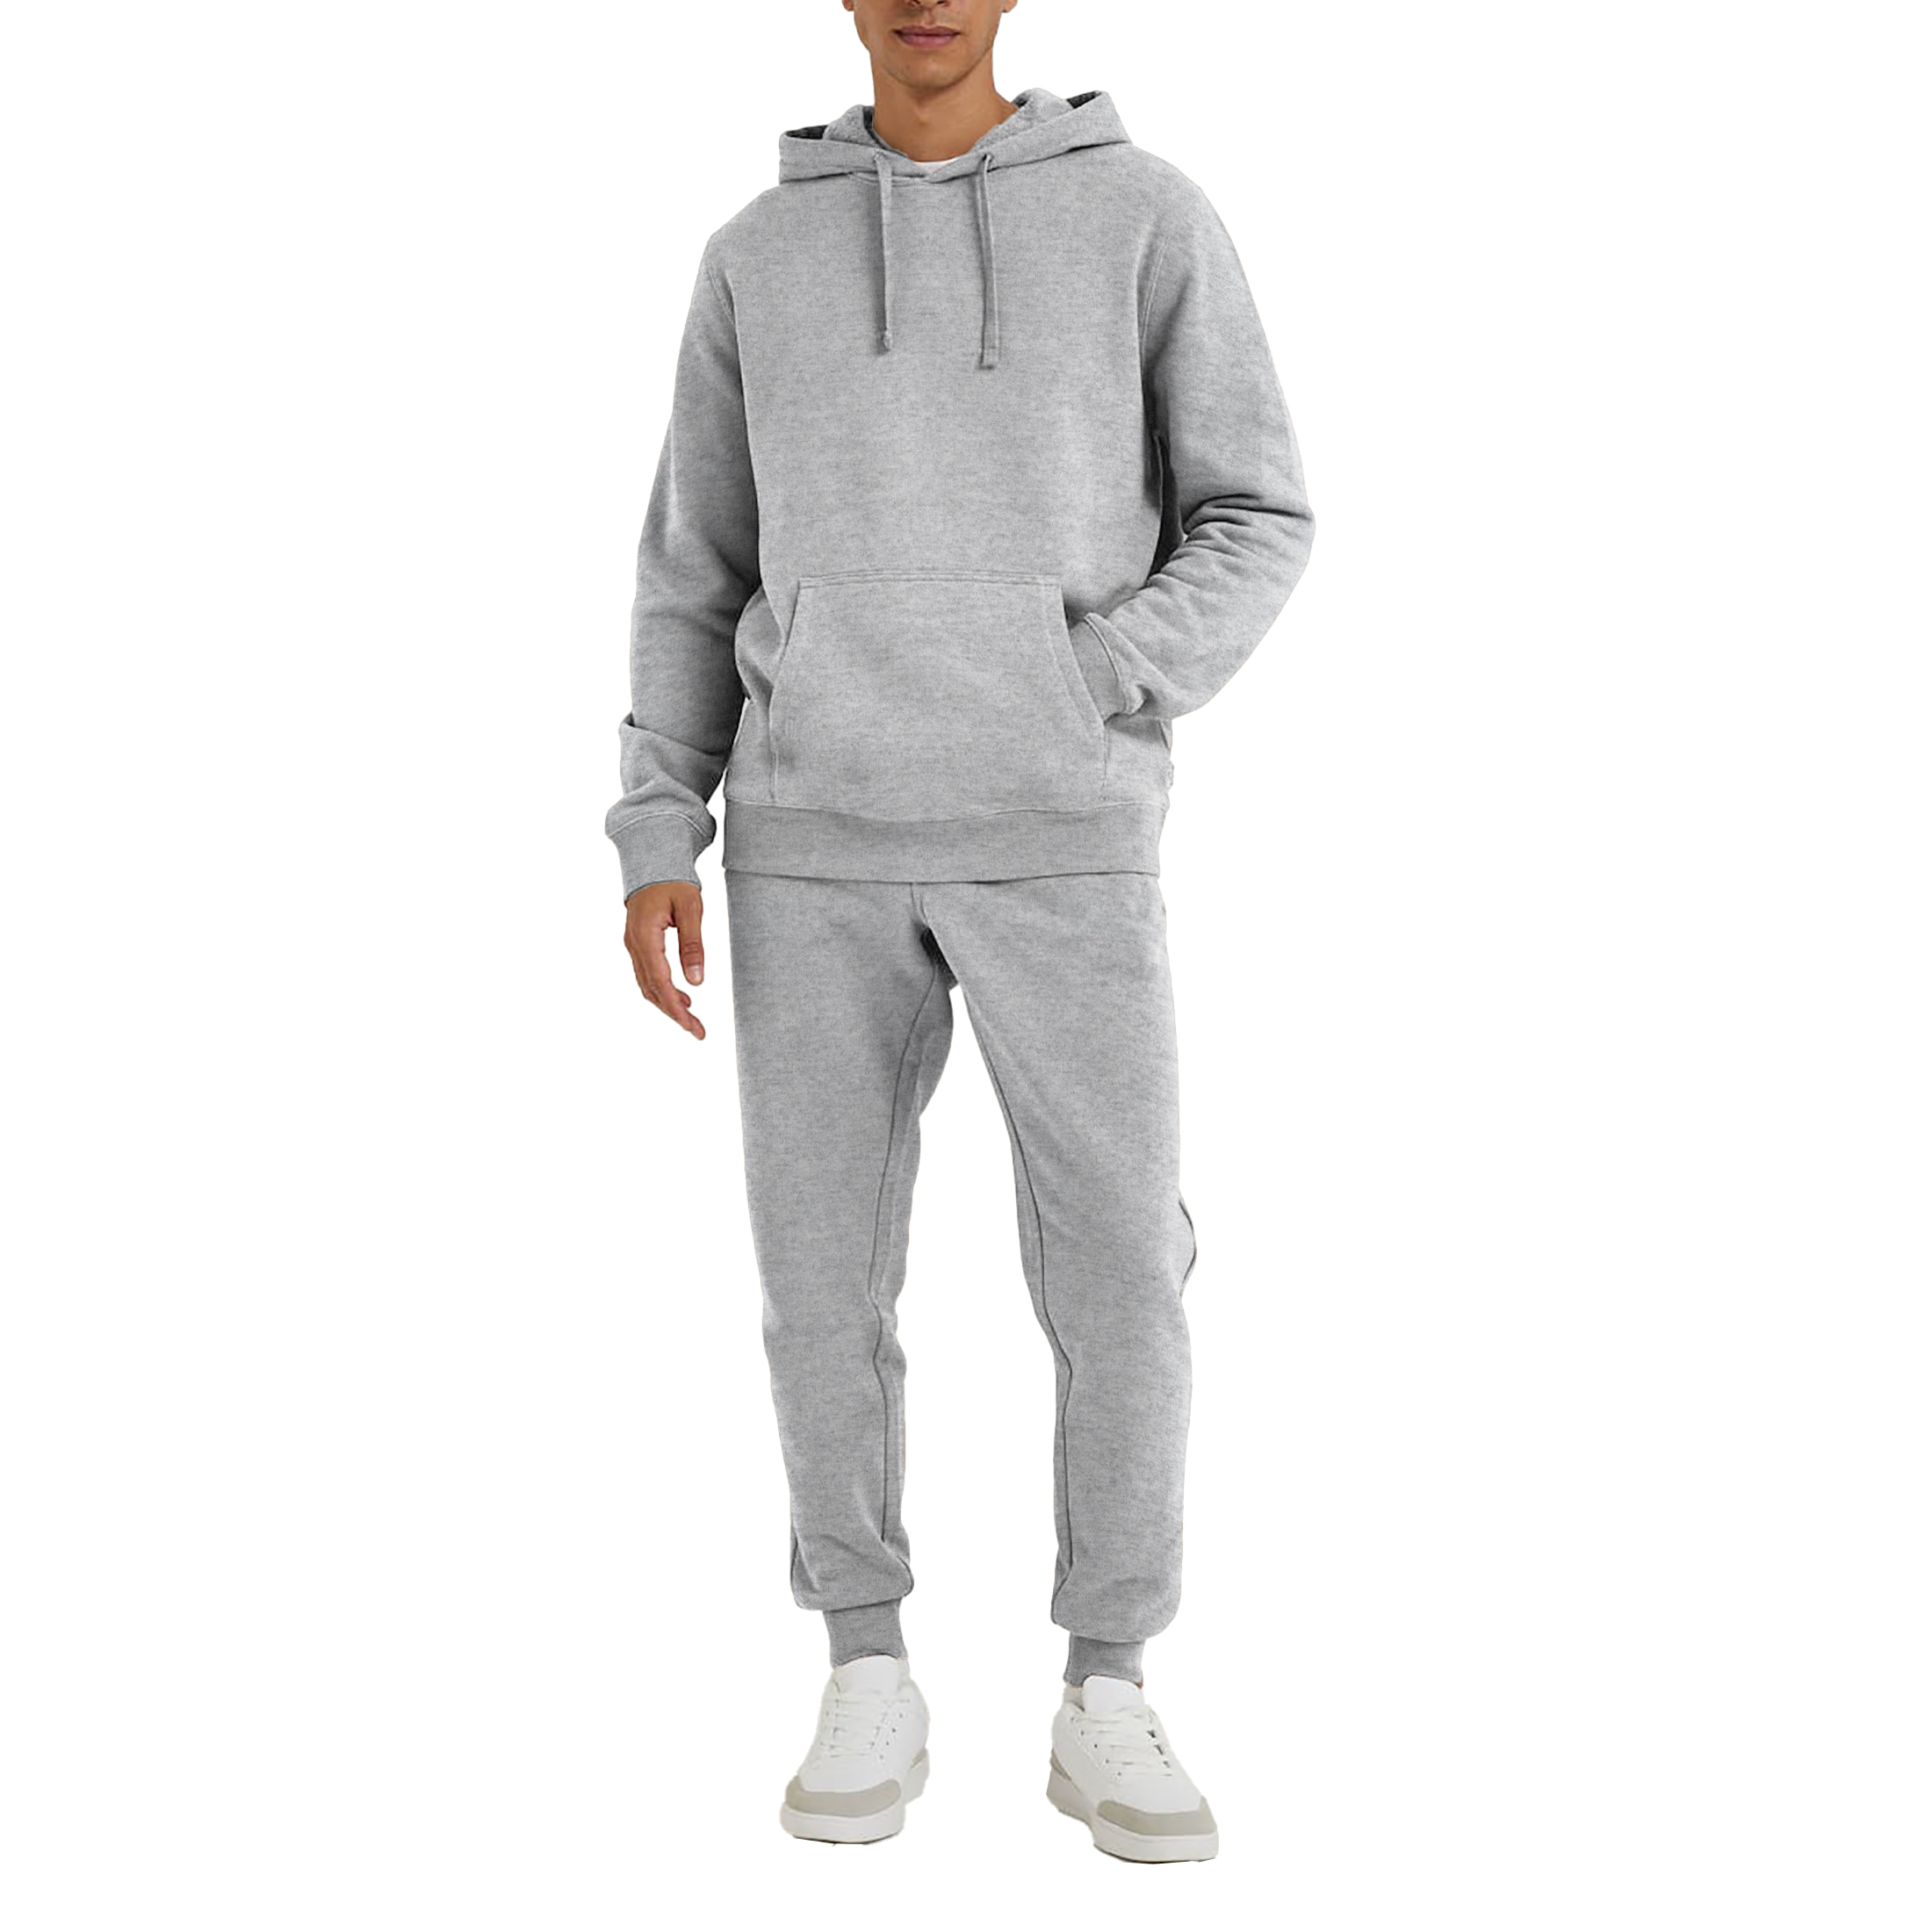 Men's Athletic Warm Jogging Pullover Active Tracksuit - Grey, X-Large